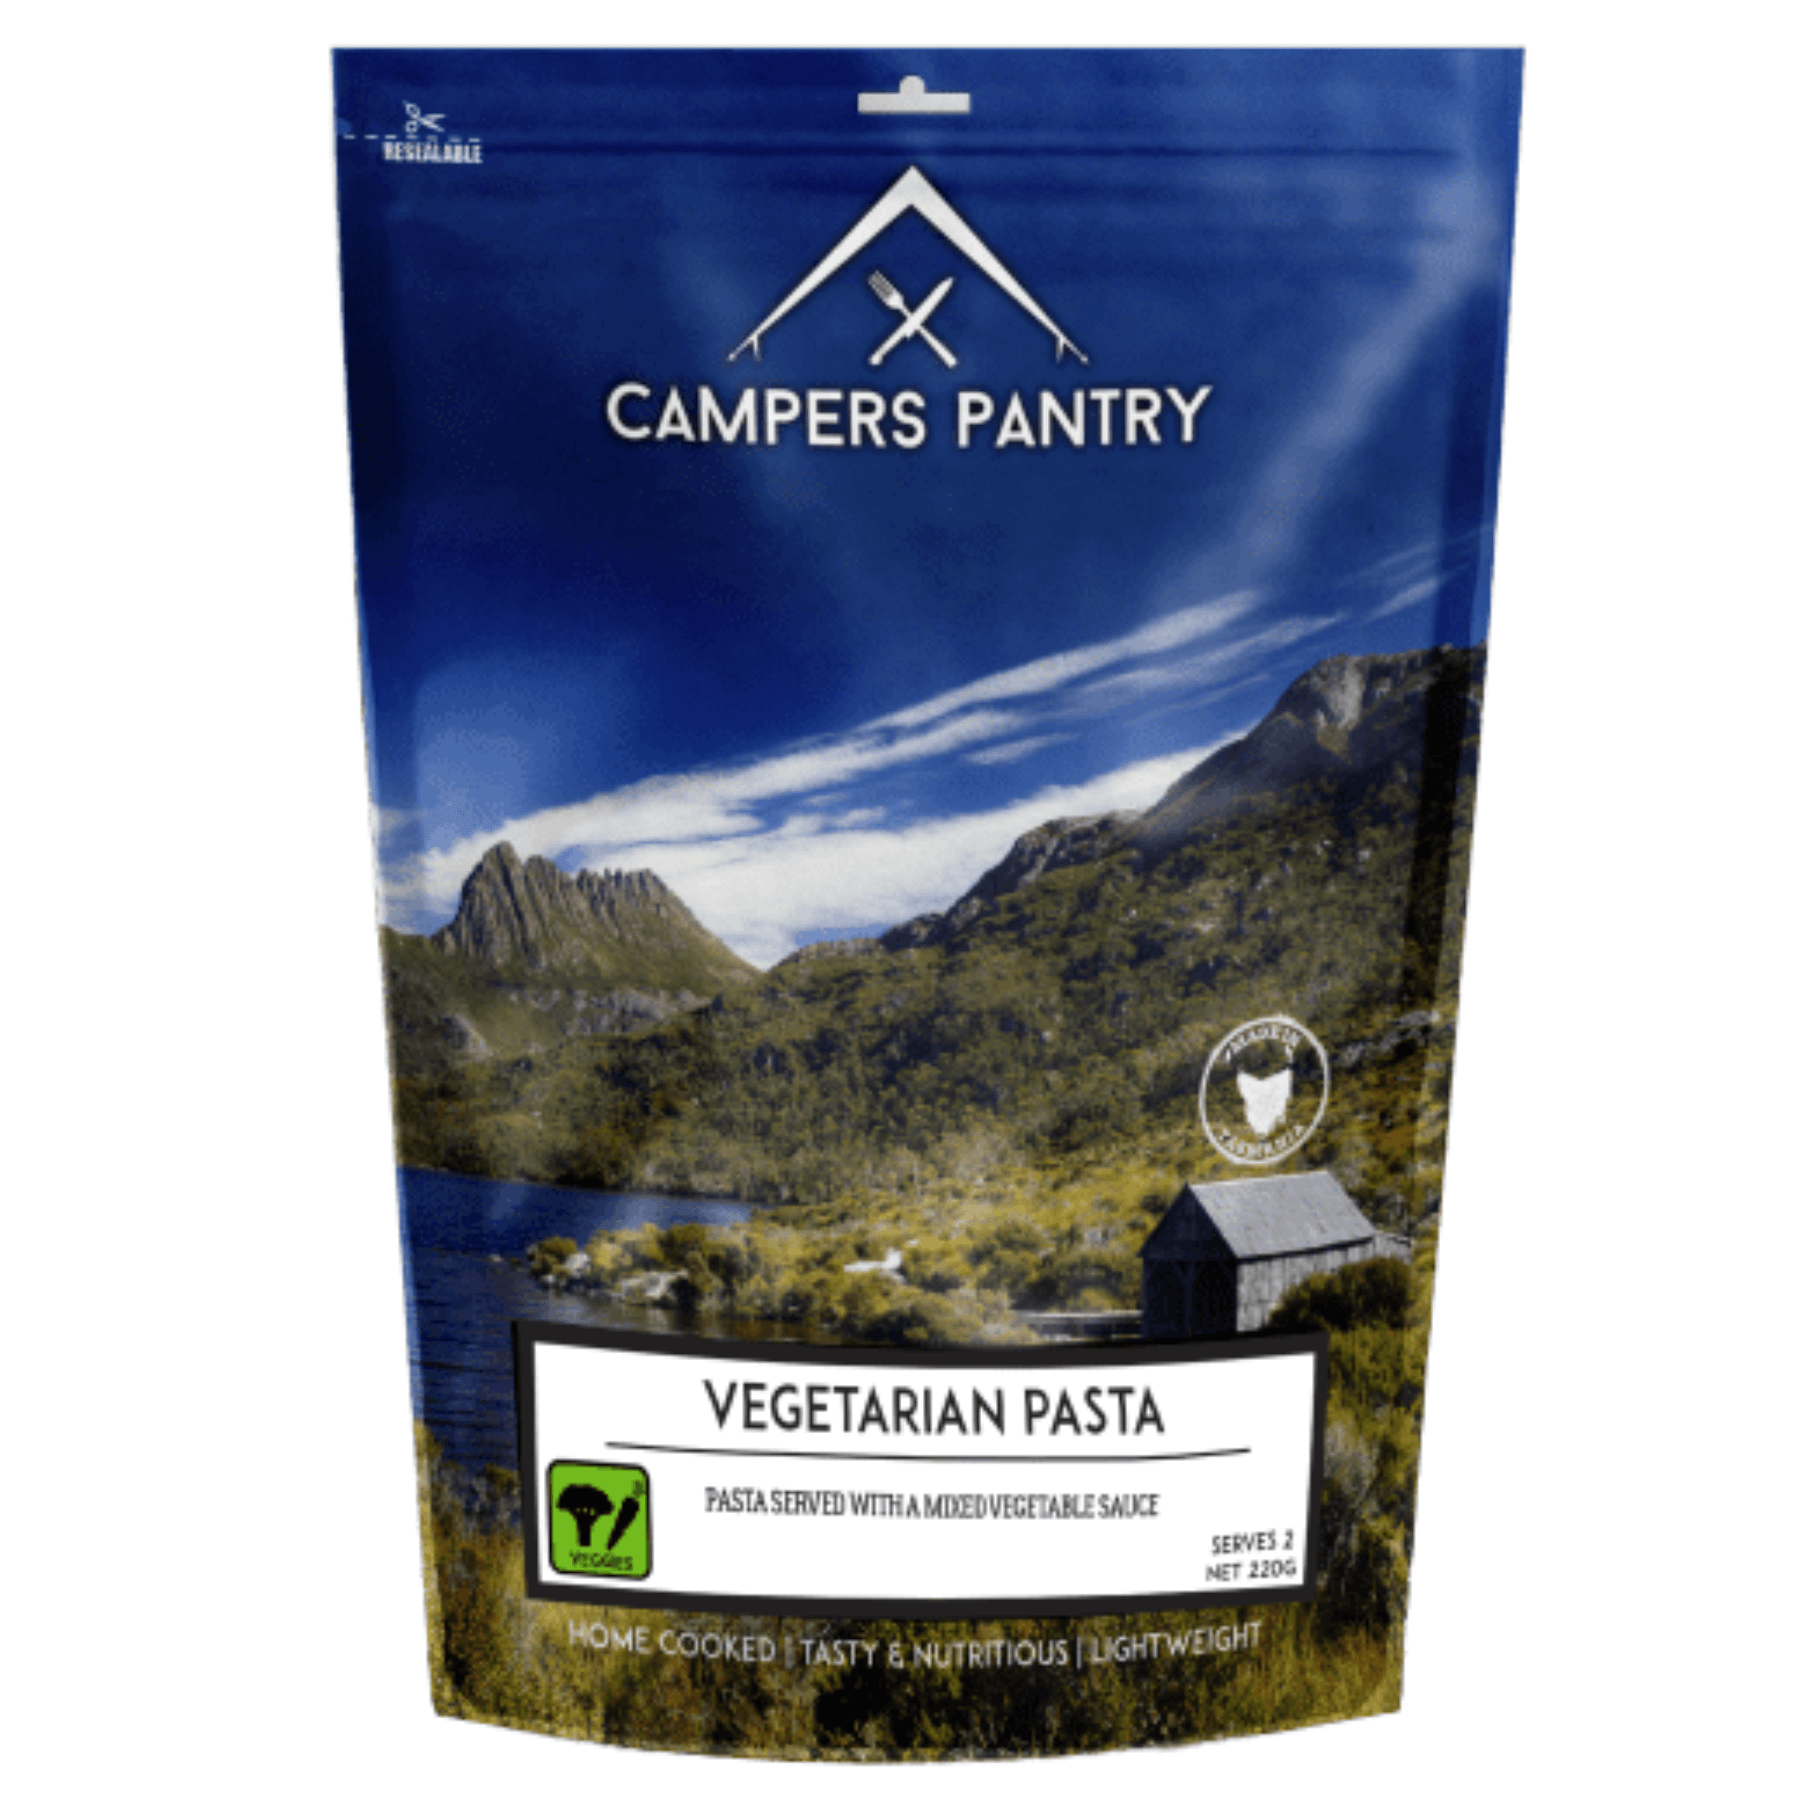 campers pantry Dehydrated Meals Single Serve / Vegetarian Pasta Freeze-dried Dinner Meals CPVP11017